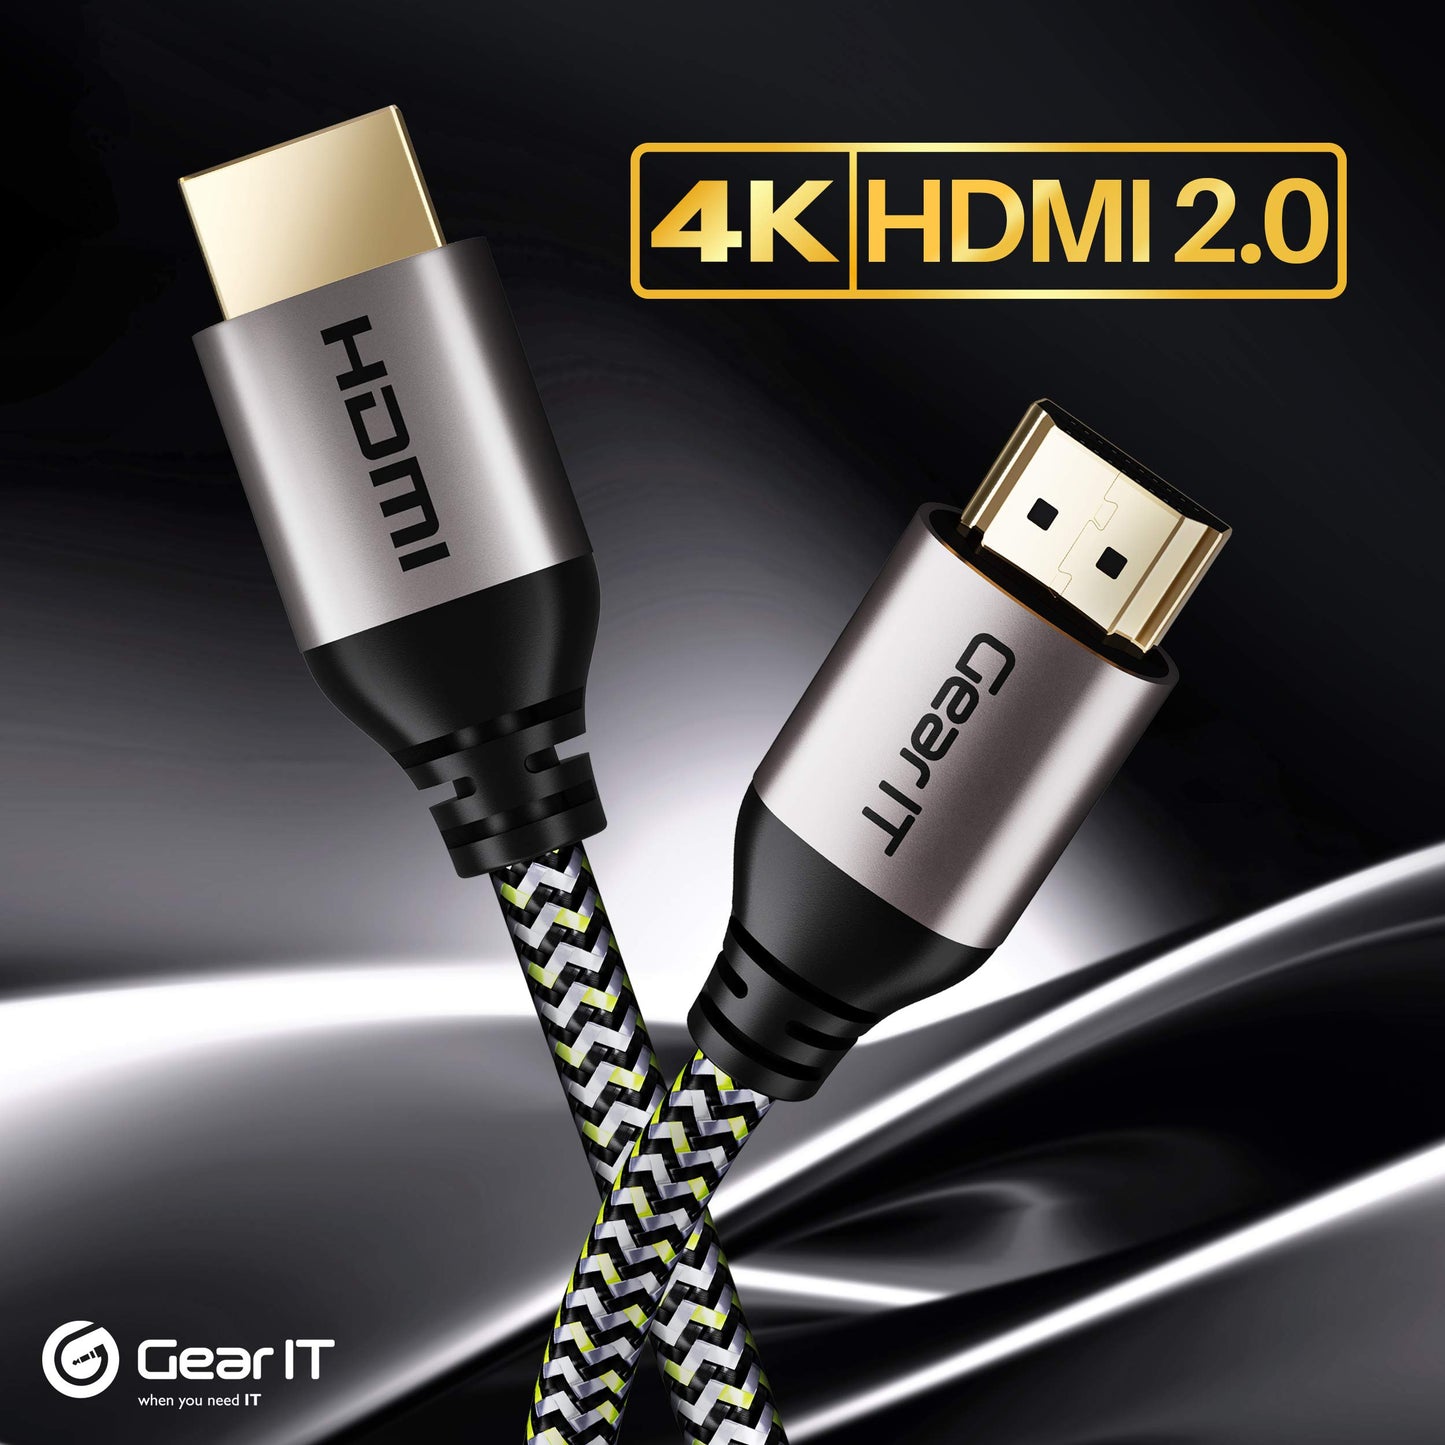 GearIT HDMI Cable (5-Pack / 16.4ft / 5m) High-Speed HDMI 2.0b, 4K 60hz, 3D, ARC, HDCP 2.2, HDR, 18Gbps - Nylon Braided Cord